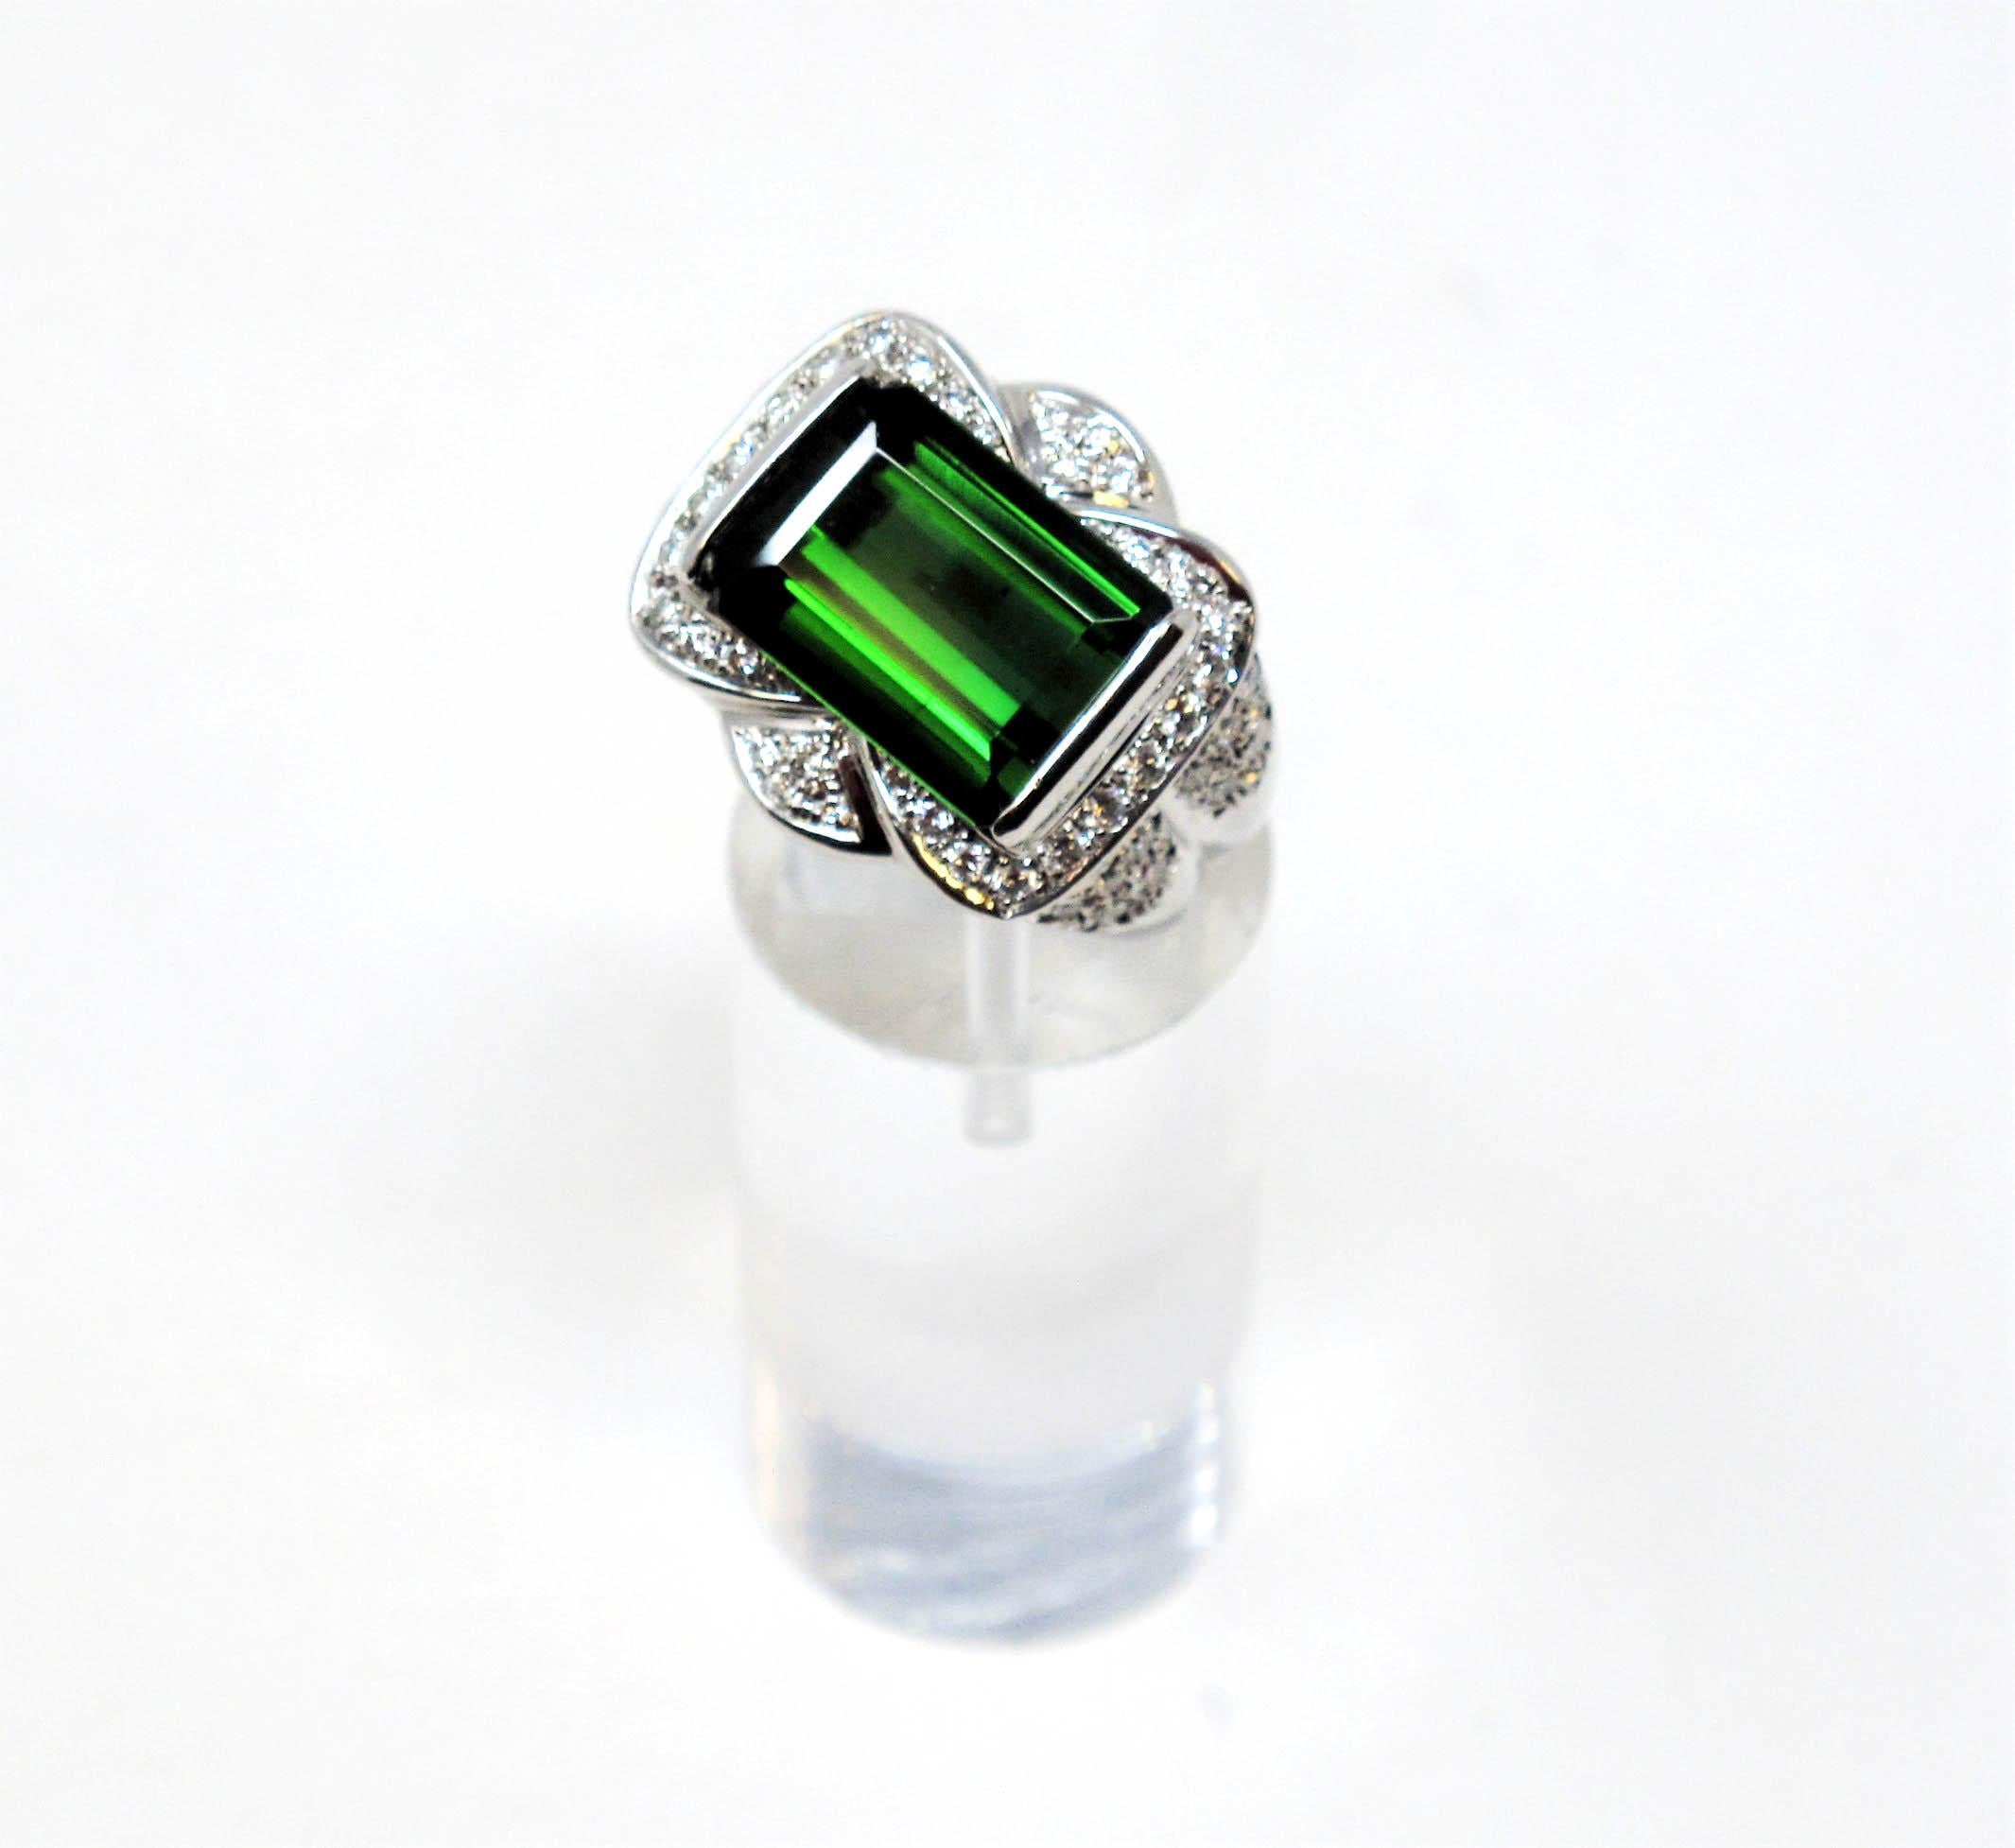 Ring size: 6

Bold, beautiful green tourmaline and diamond cocktail ring. The vibrant green stone against the bright white diamonds really catches the viewers eye. It is substantial in both size and sparkle, making this ring a true treasure. 

The